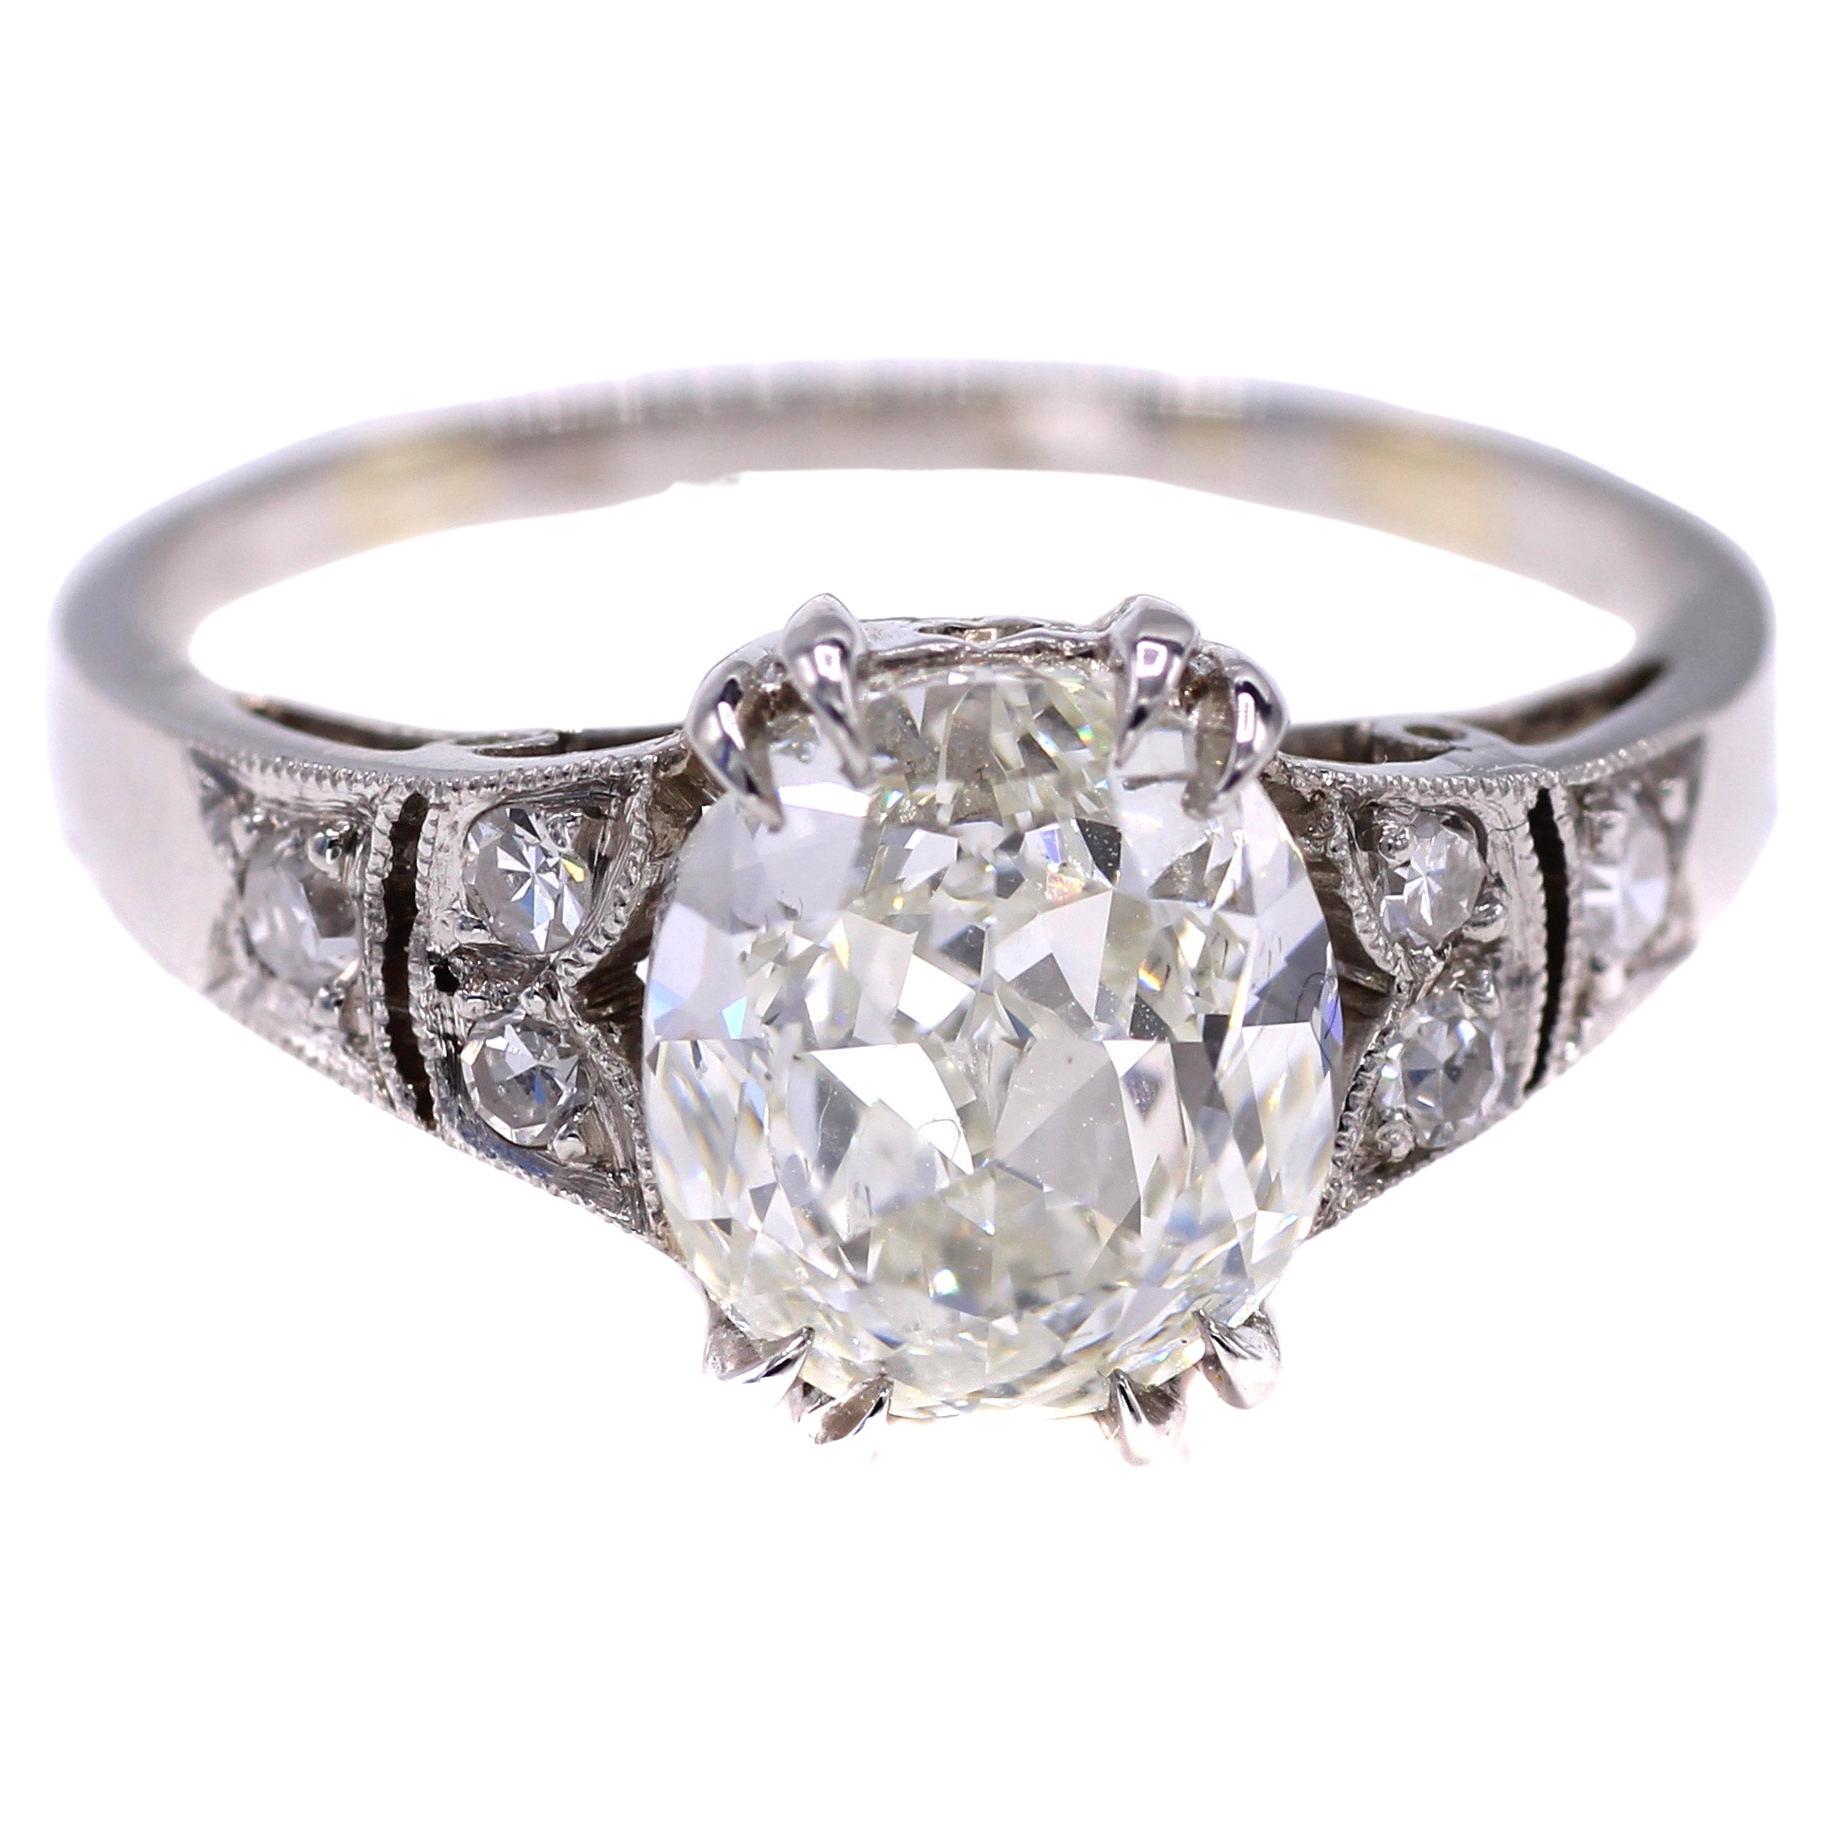 A beautiful and lively Cushion Brilliant is the centerpiece of this beautiful and well handcrafted platinum engagement ring. The cushion is accompanied by a report from the GIA giving it a color grade of K and a clarity of SI1. The amazing cut of